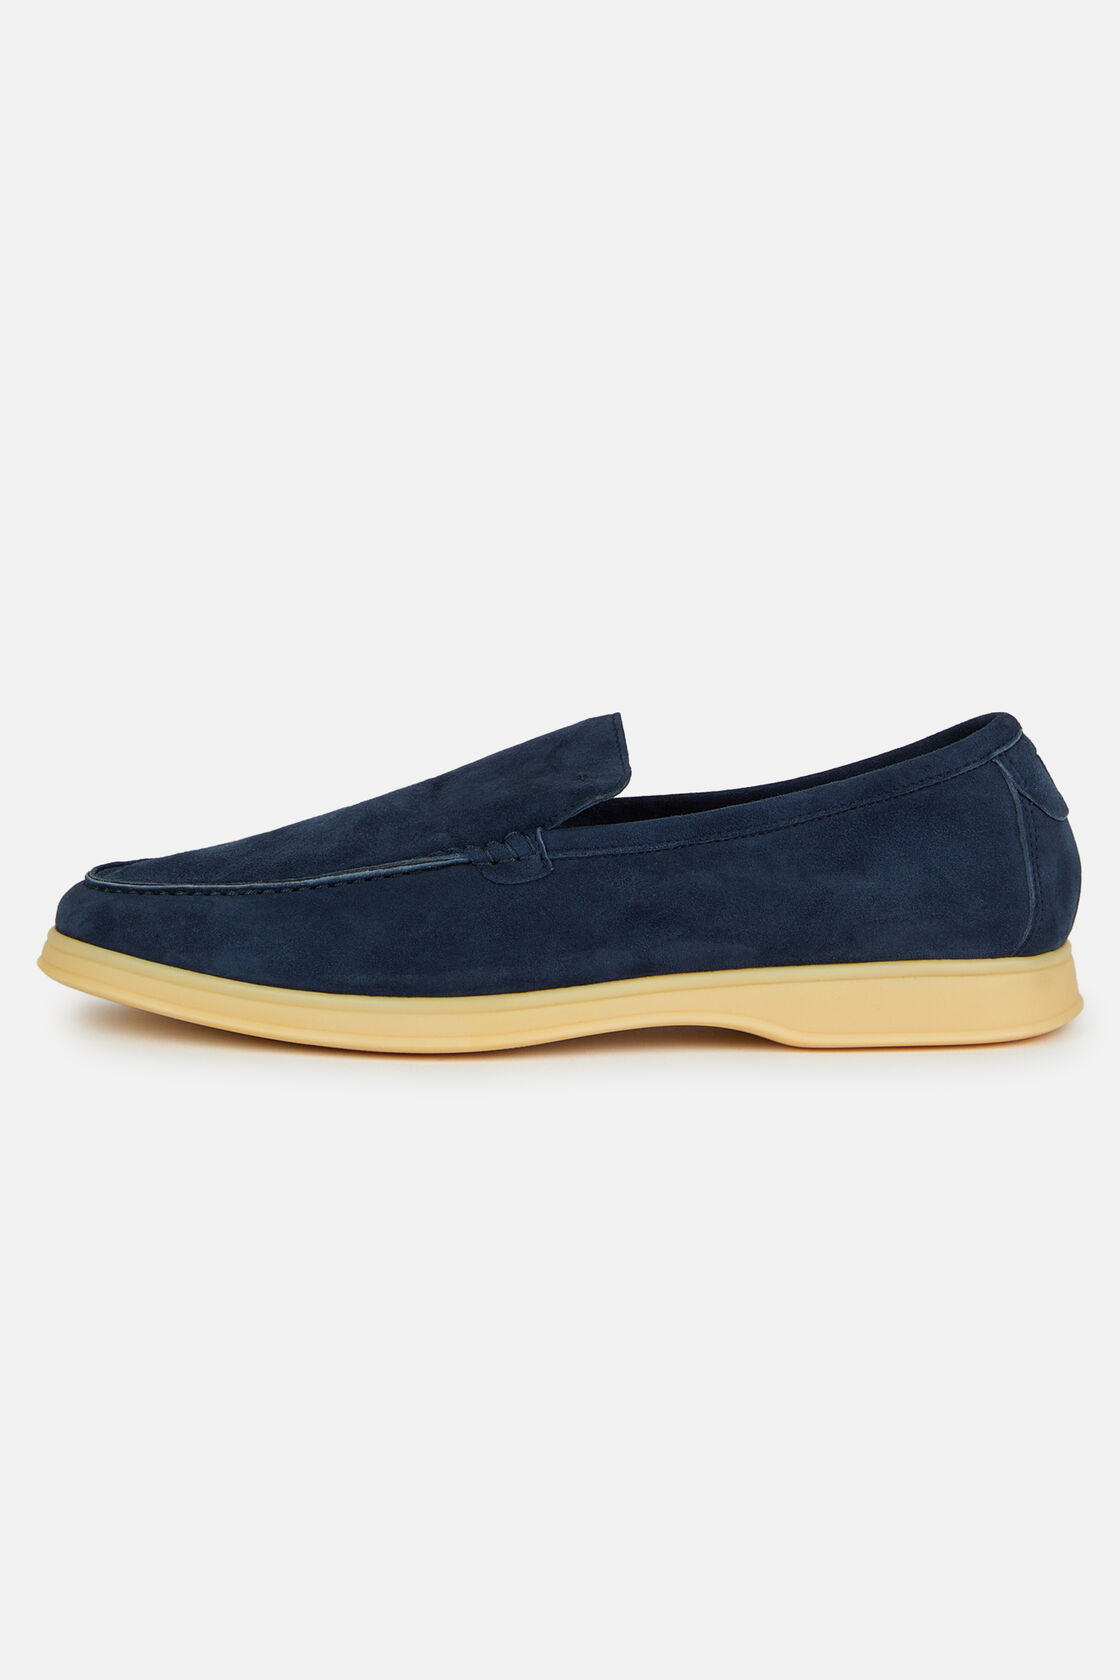 Navy Suede Loafers, Navy blue, hi-res